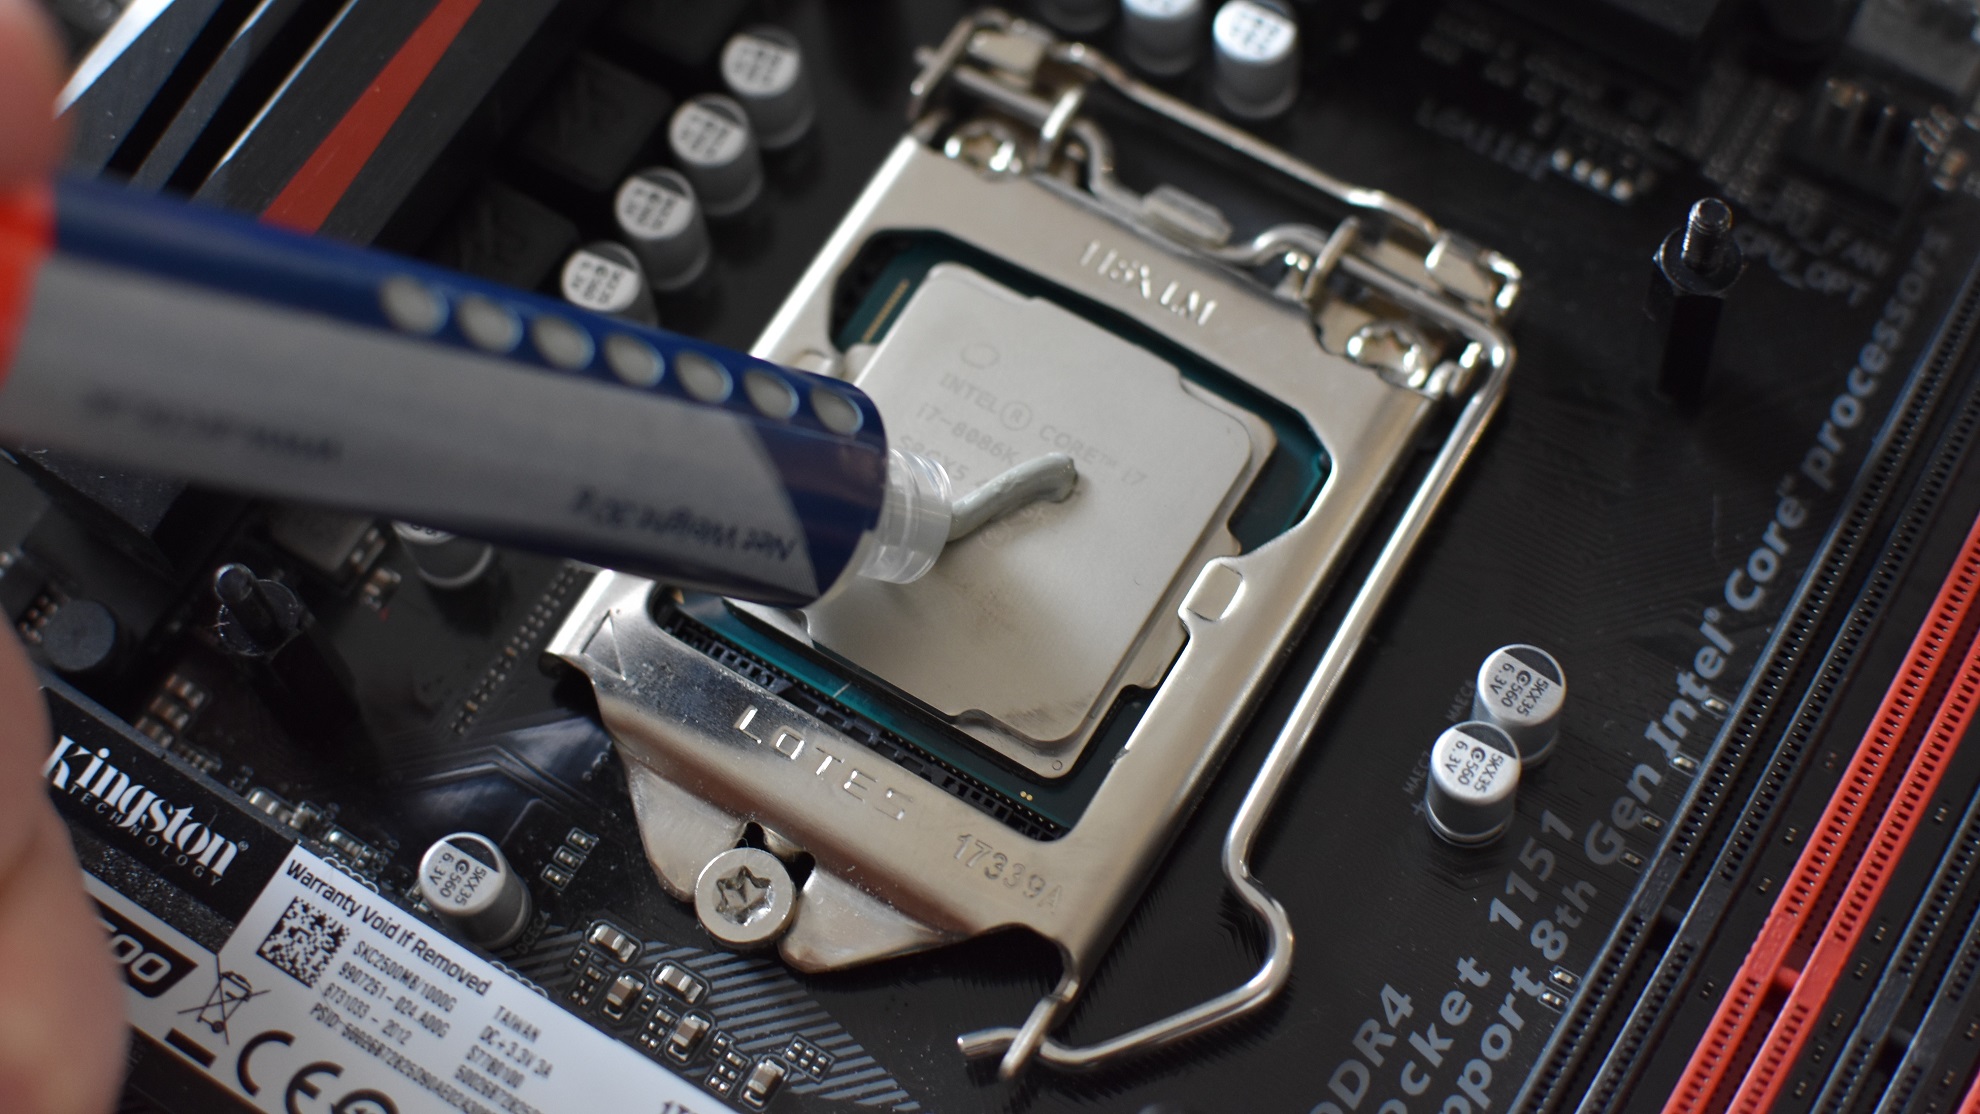 Some thermal paste being squeezed from a tube onto an Intel CPU.